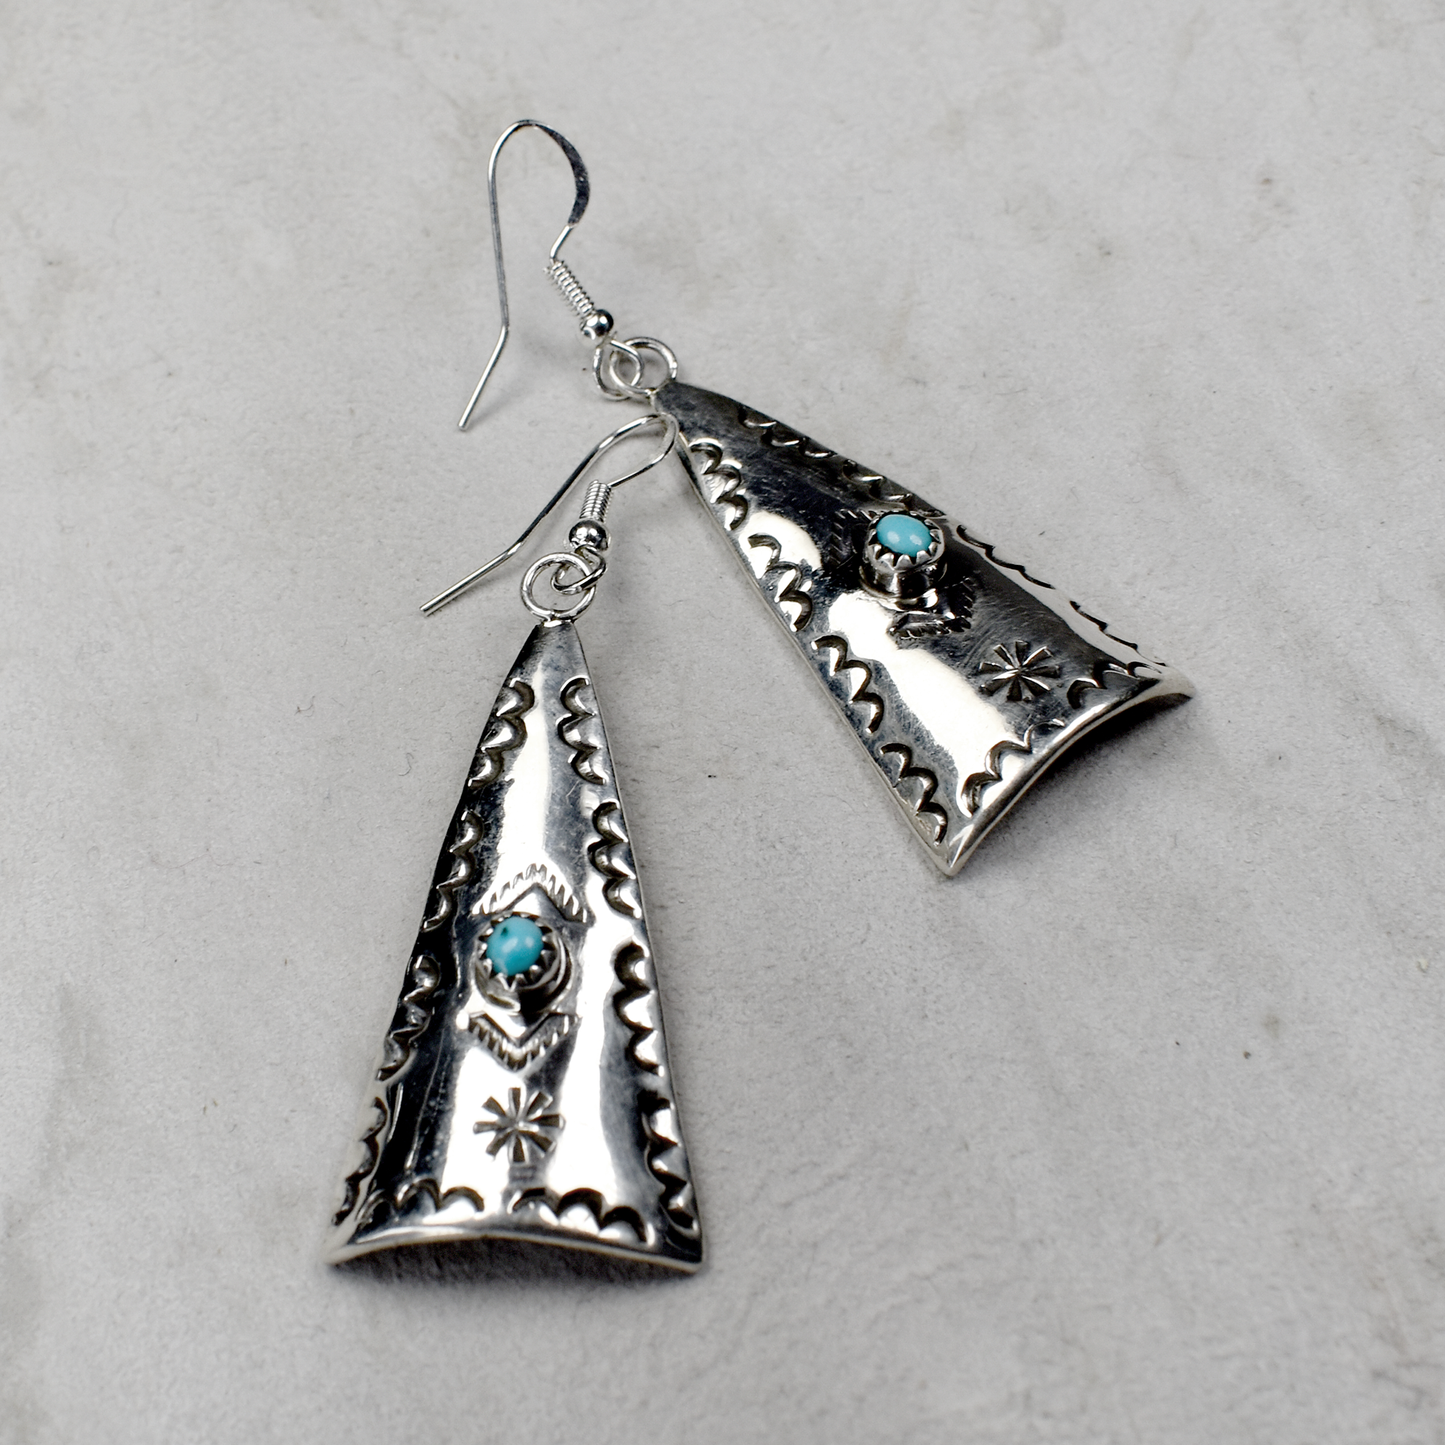 Hand Stamped Triangular Sand Cast Earrings with Sleeping Beauty Turquoise Inlay by Pauline Nelson